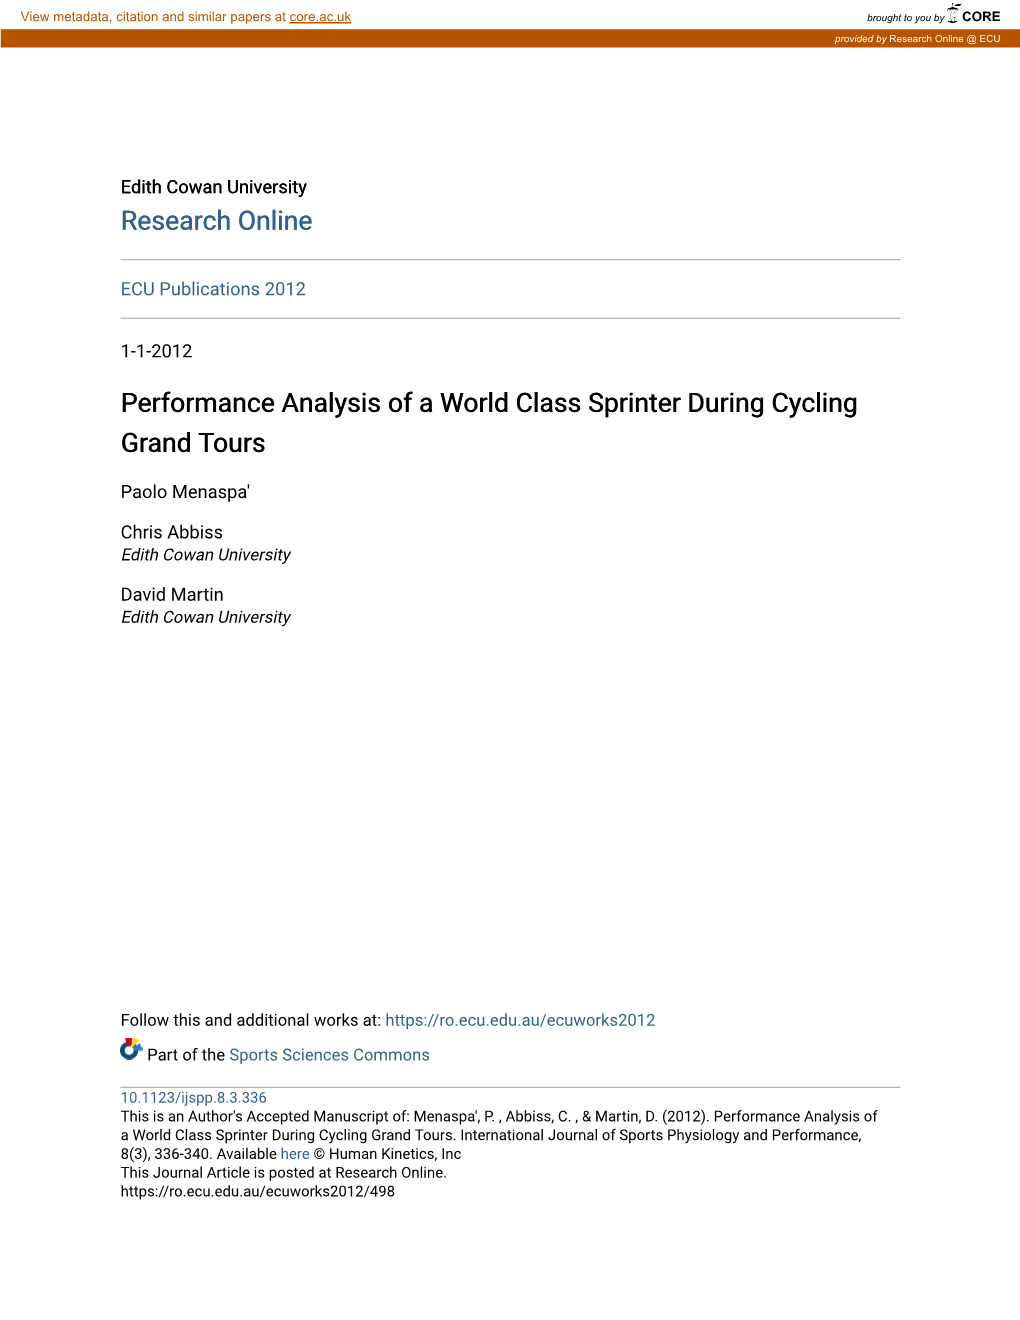 Performance Analysis of a World Class Sprinter During Cycling Grand Tours